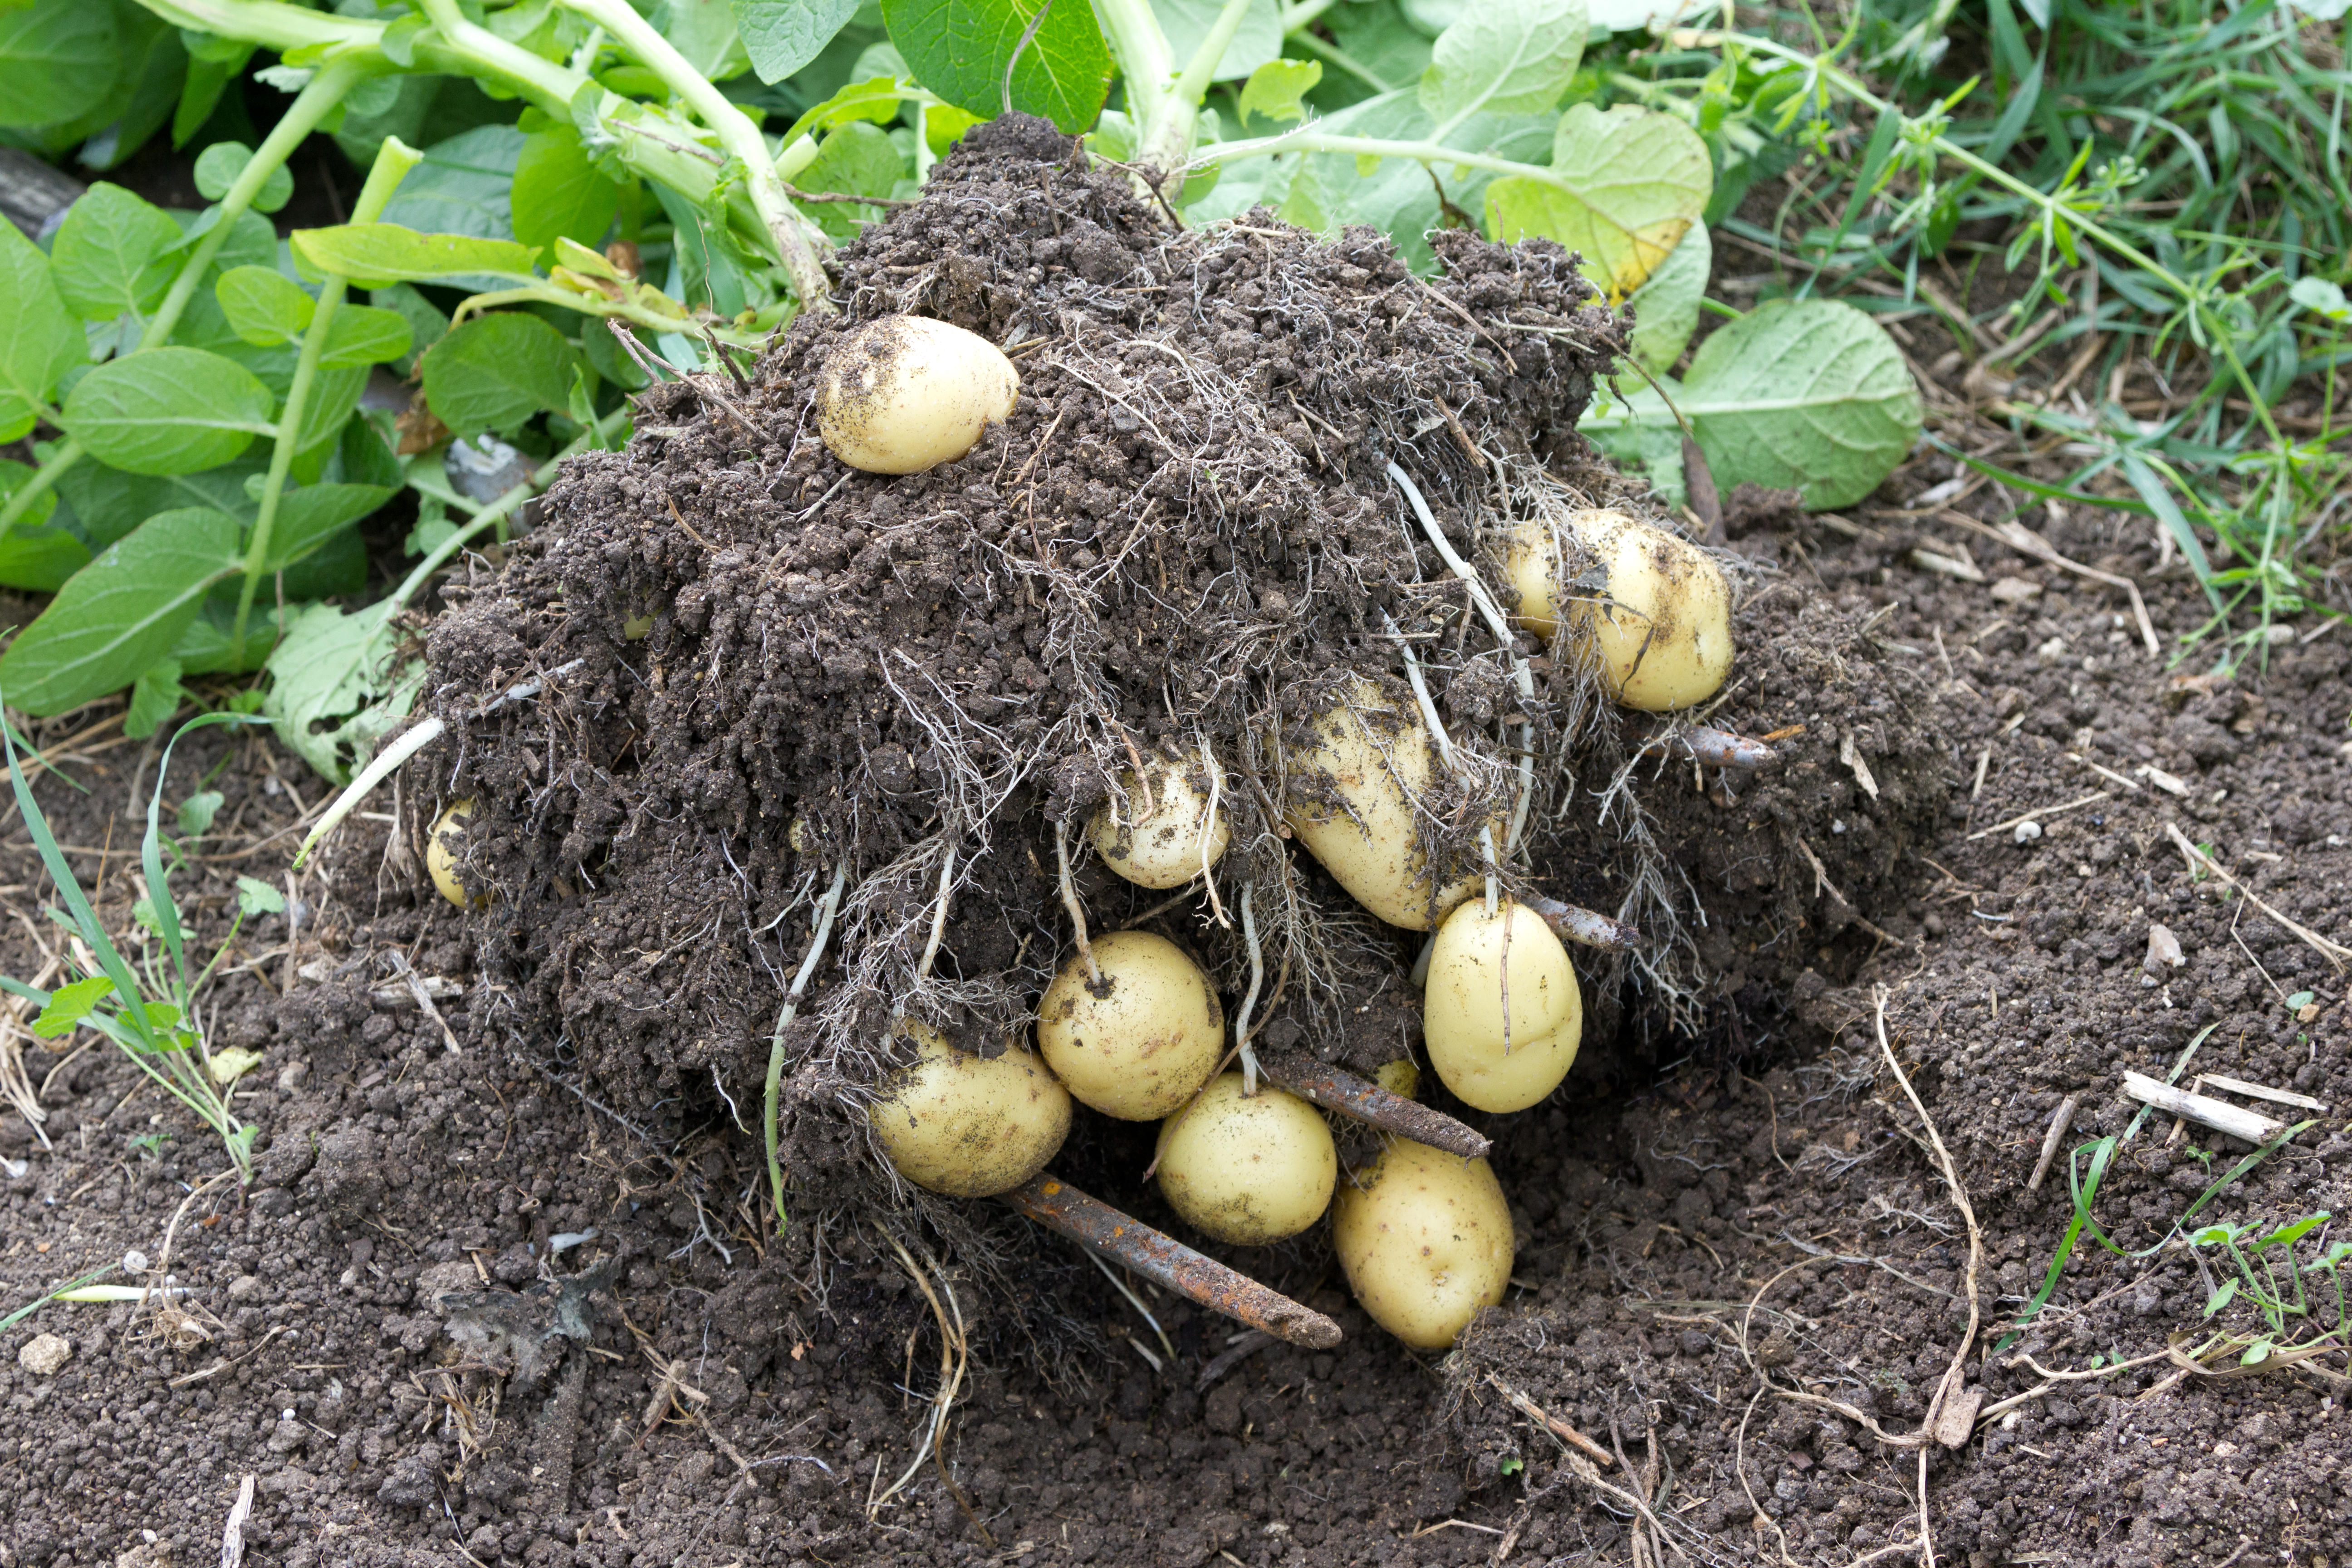 New potatoes straight from the earth (Alamy/PA)